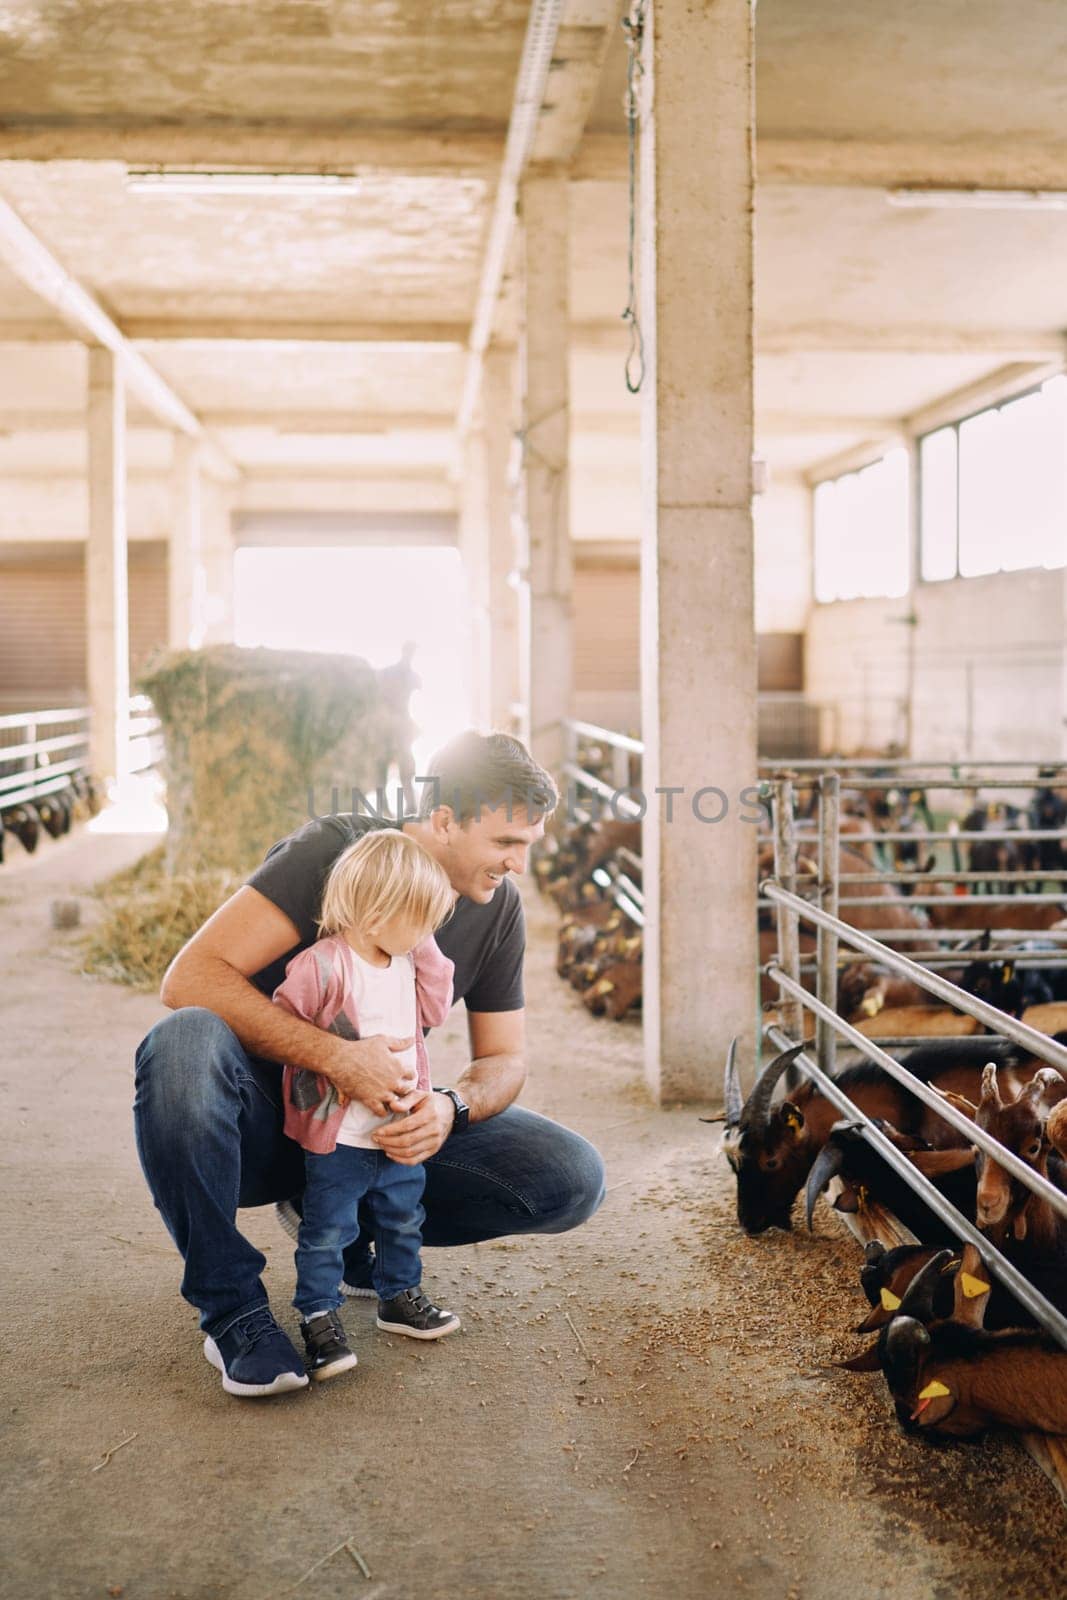 Dad squatted next to a little girl in front of a pen with goats eating grain by Nadtochiy